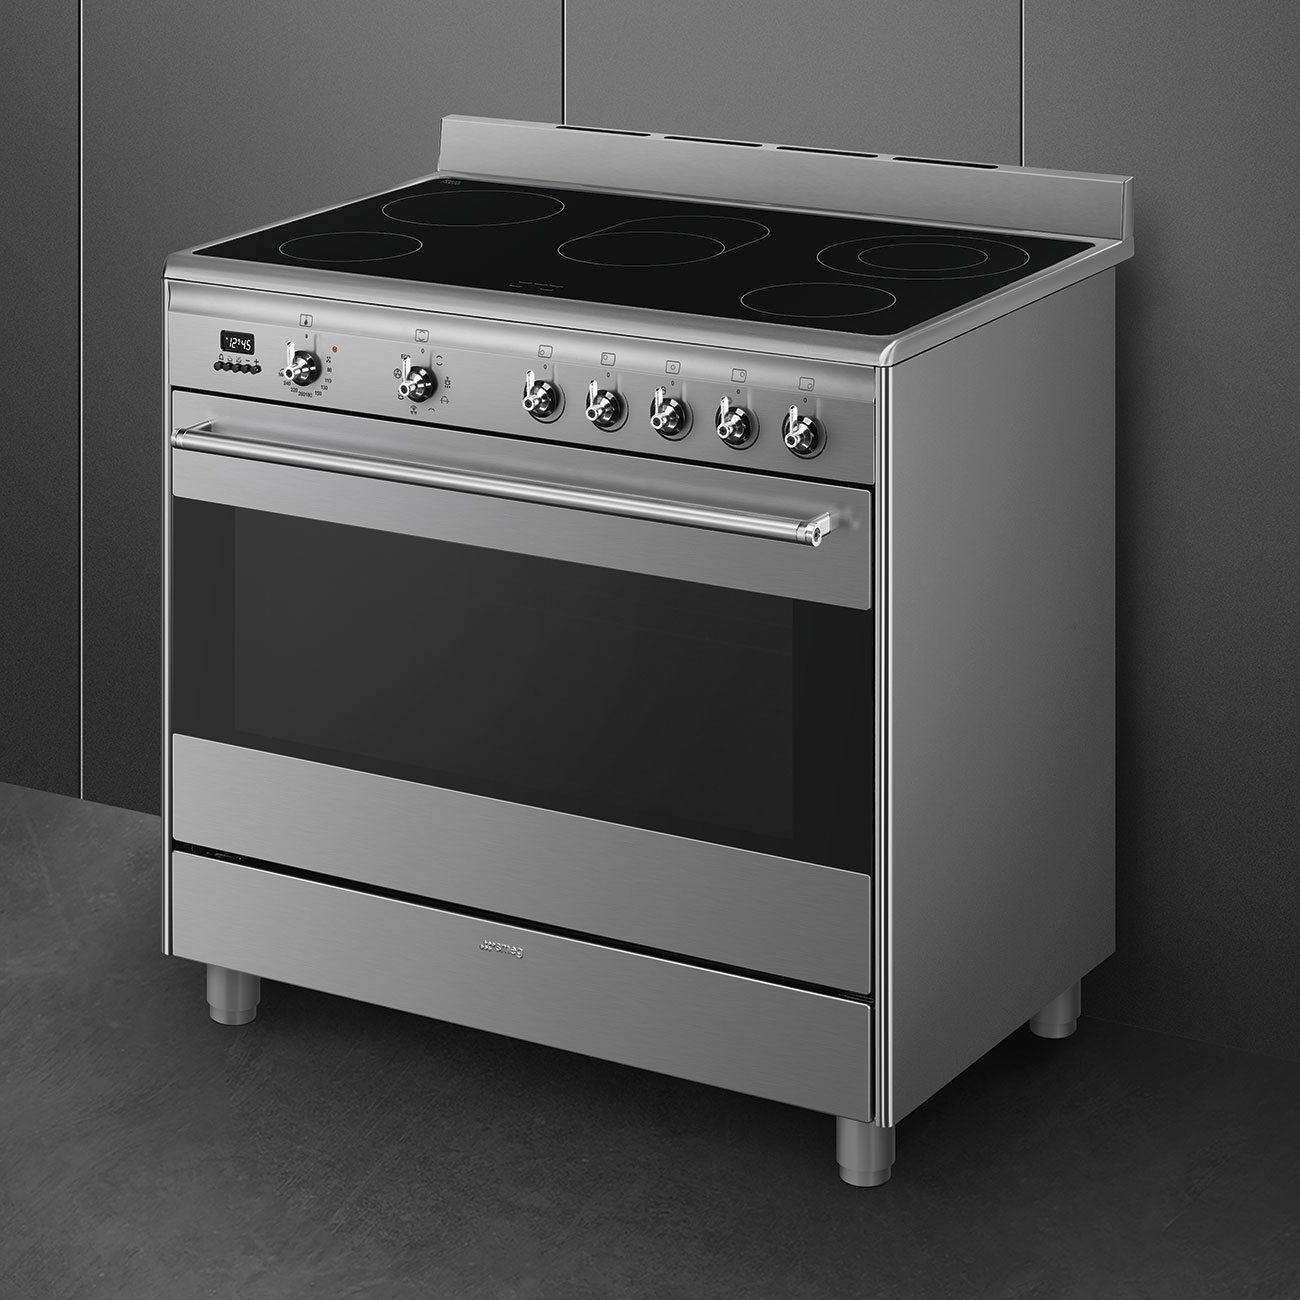 Smeg Stainless steel Cooker with Ceramic Hob_4